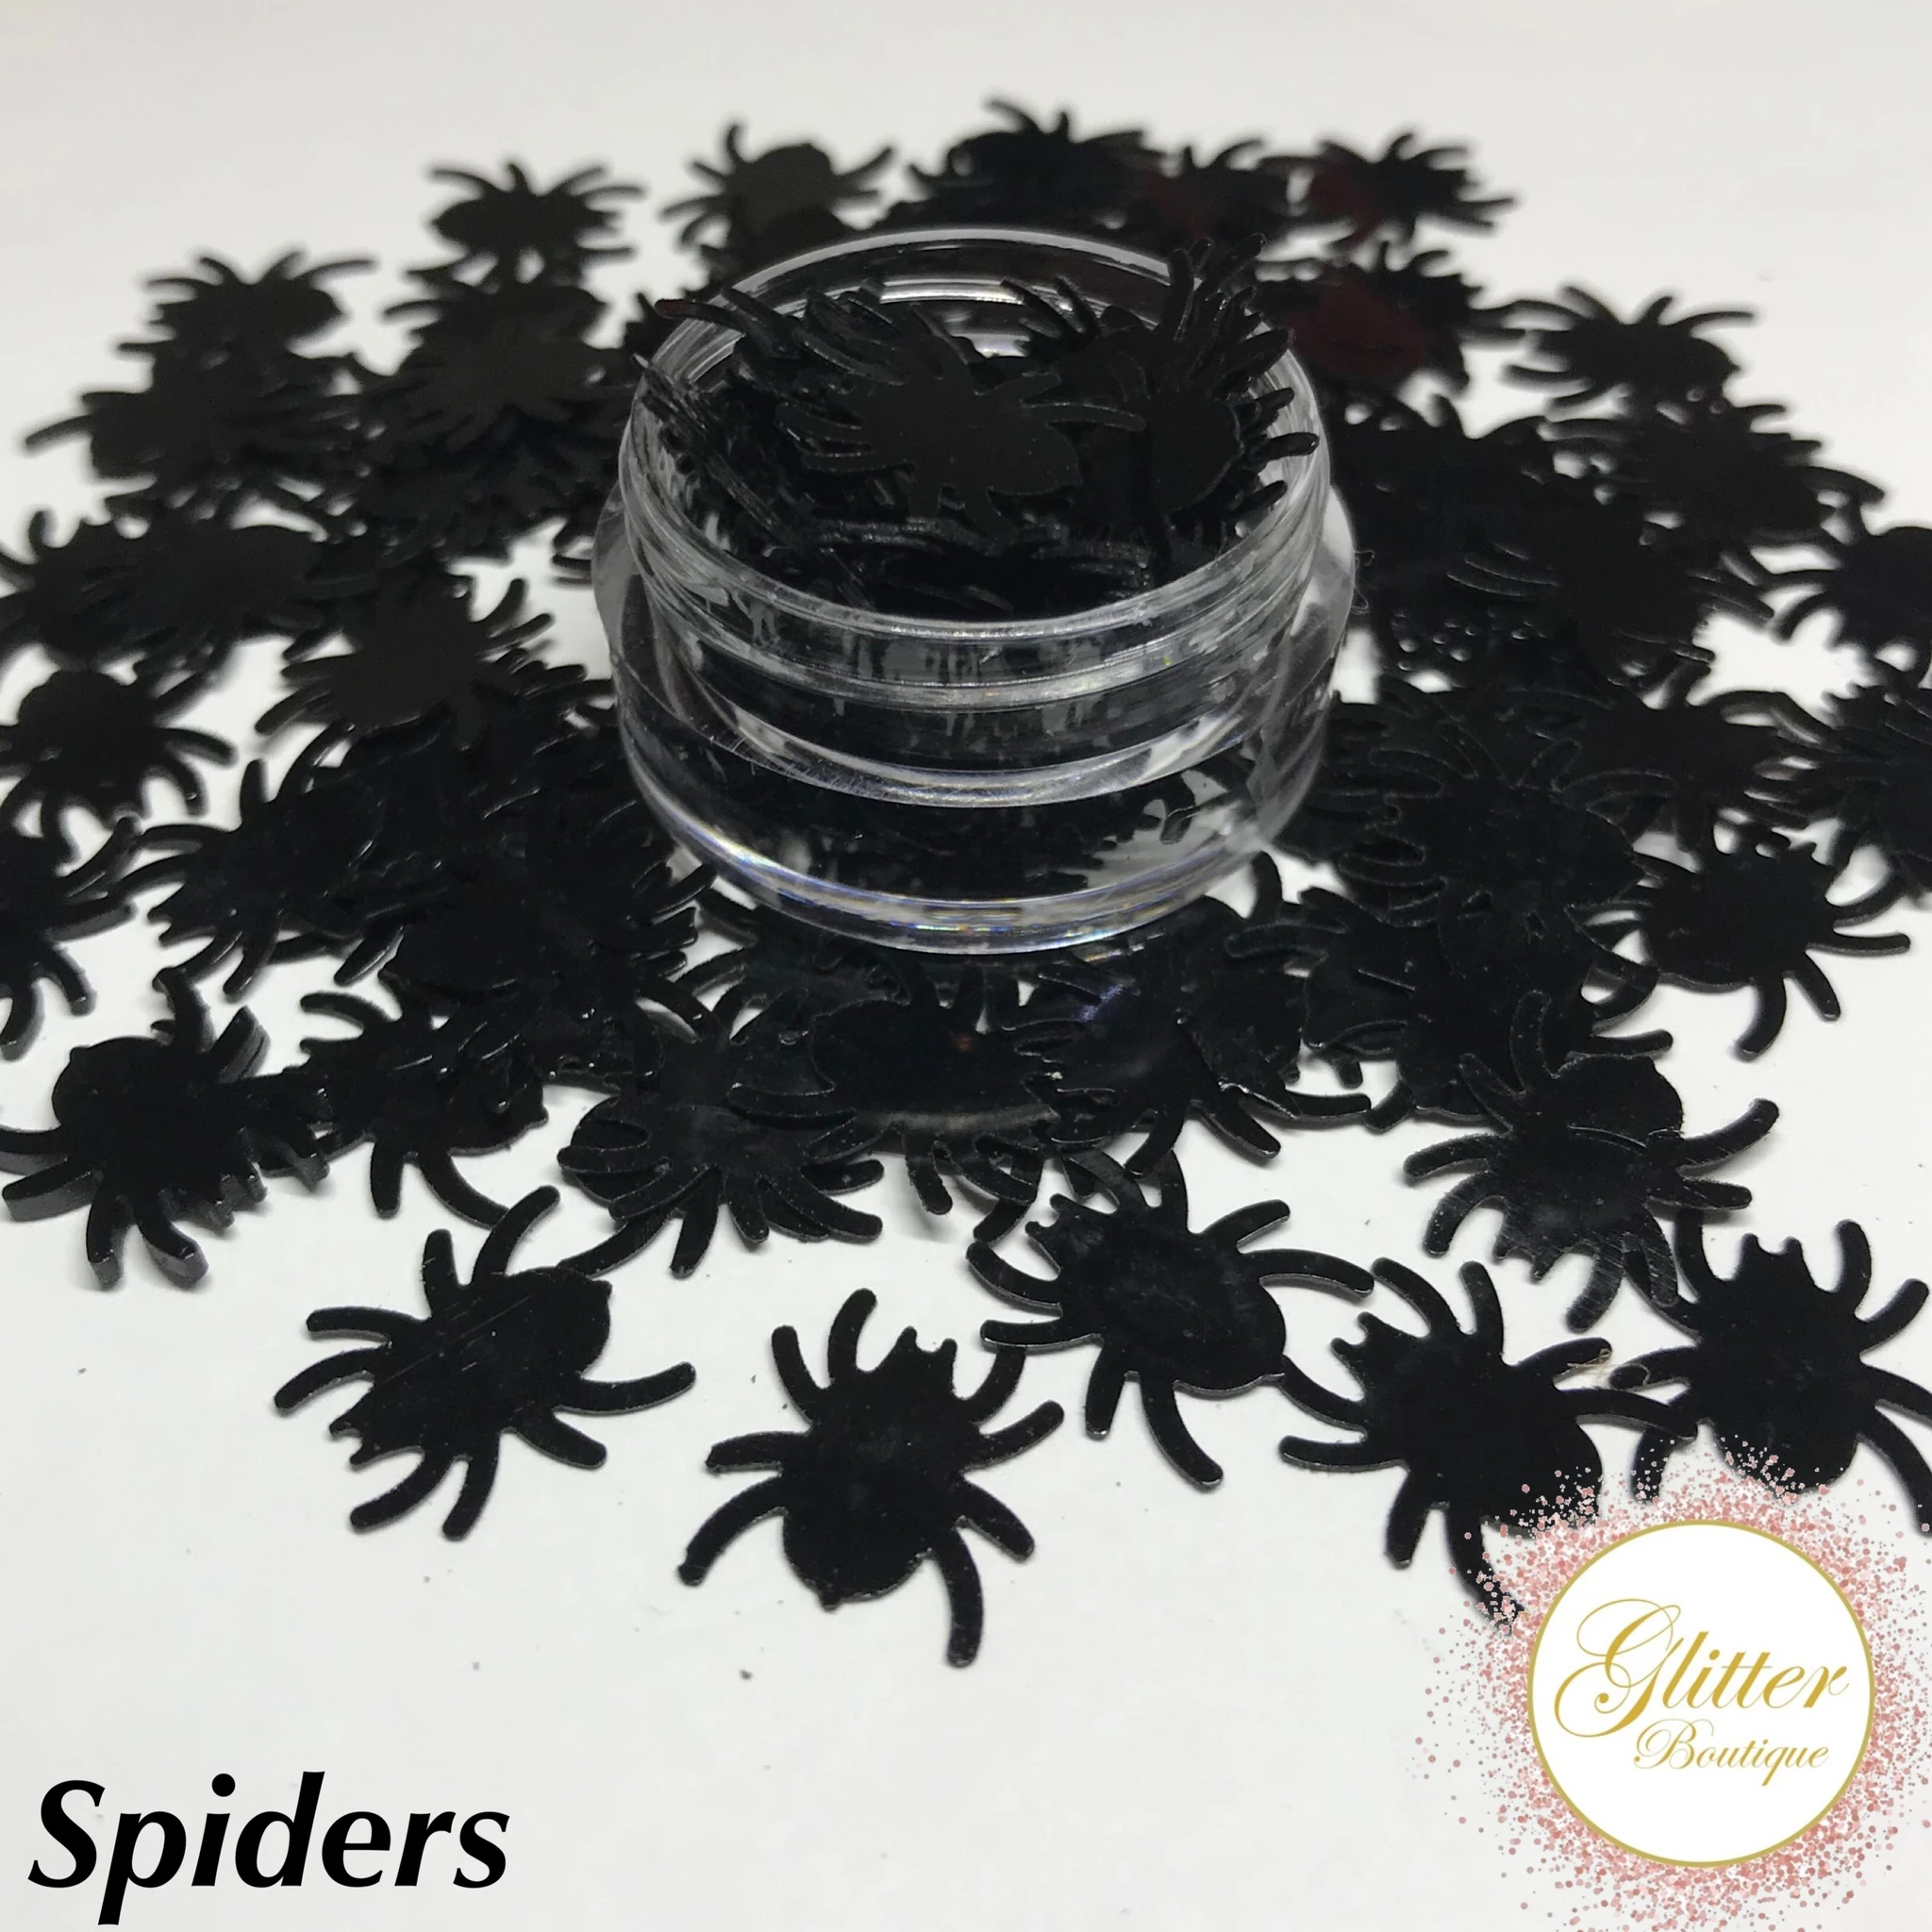 Glitter Boutique - Spiders - Creata Beauty - Professional Beauty Products